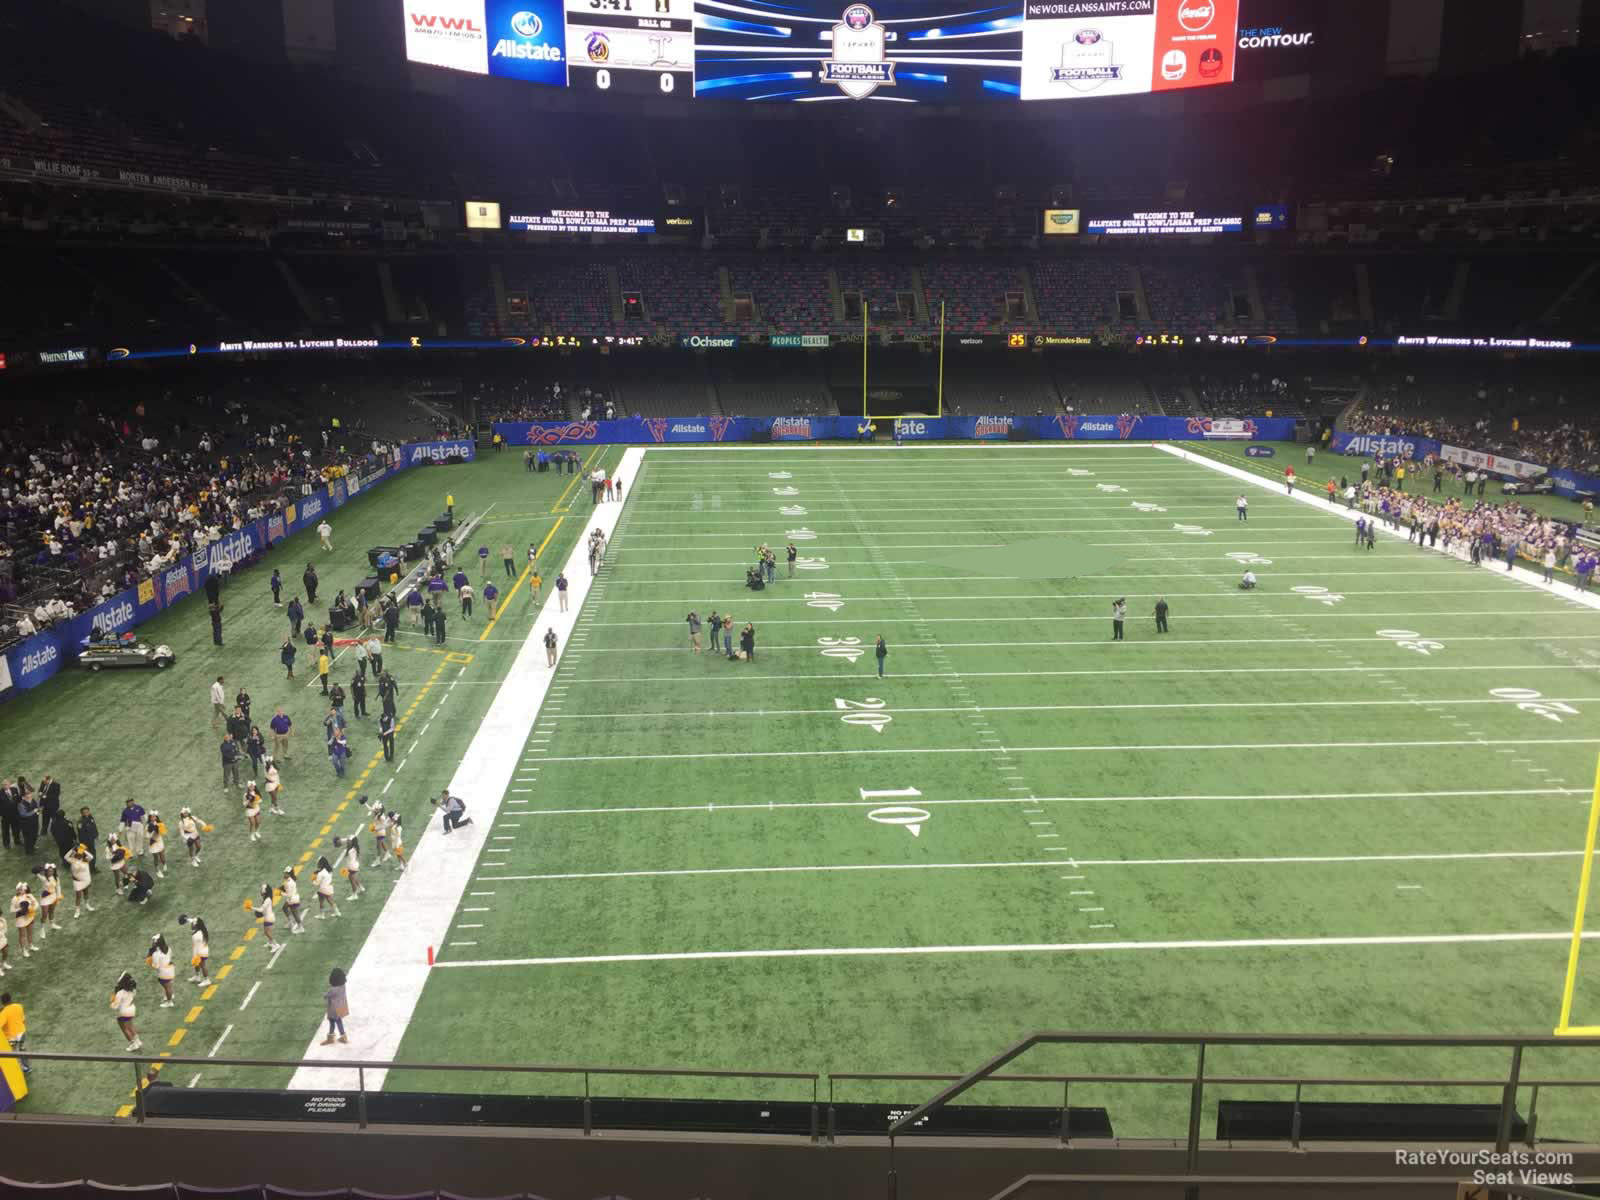 section 302, row 11 seat view  for football - caesars superdome